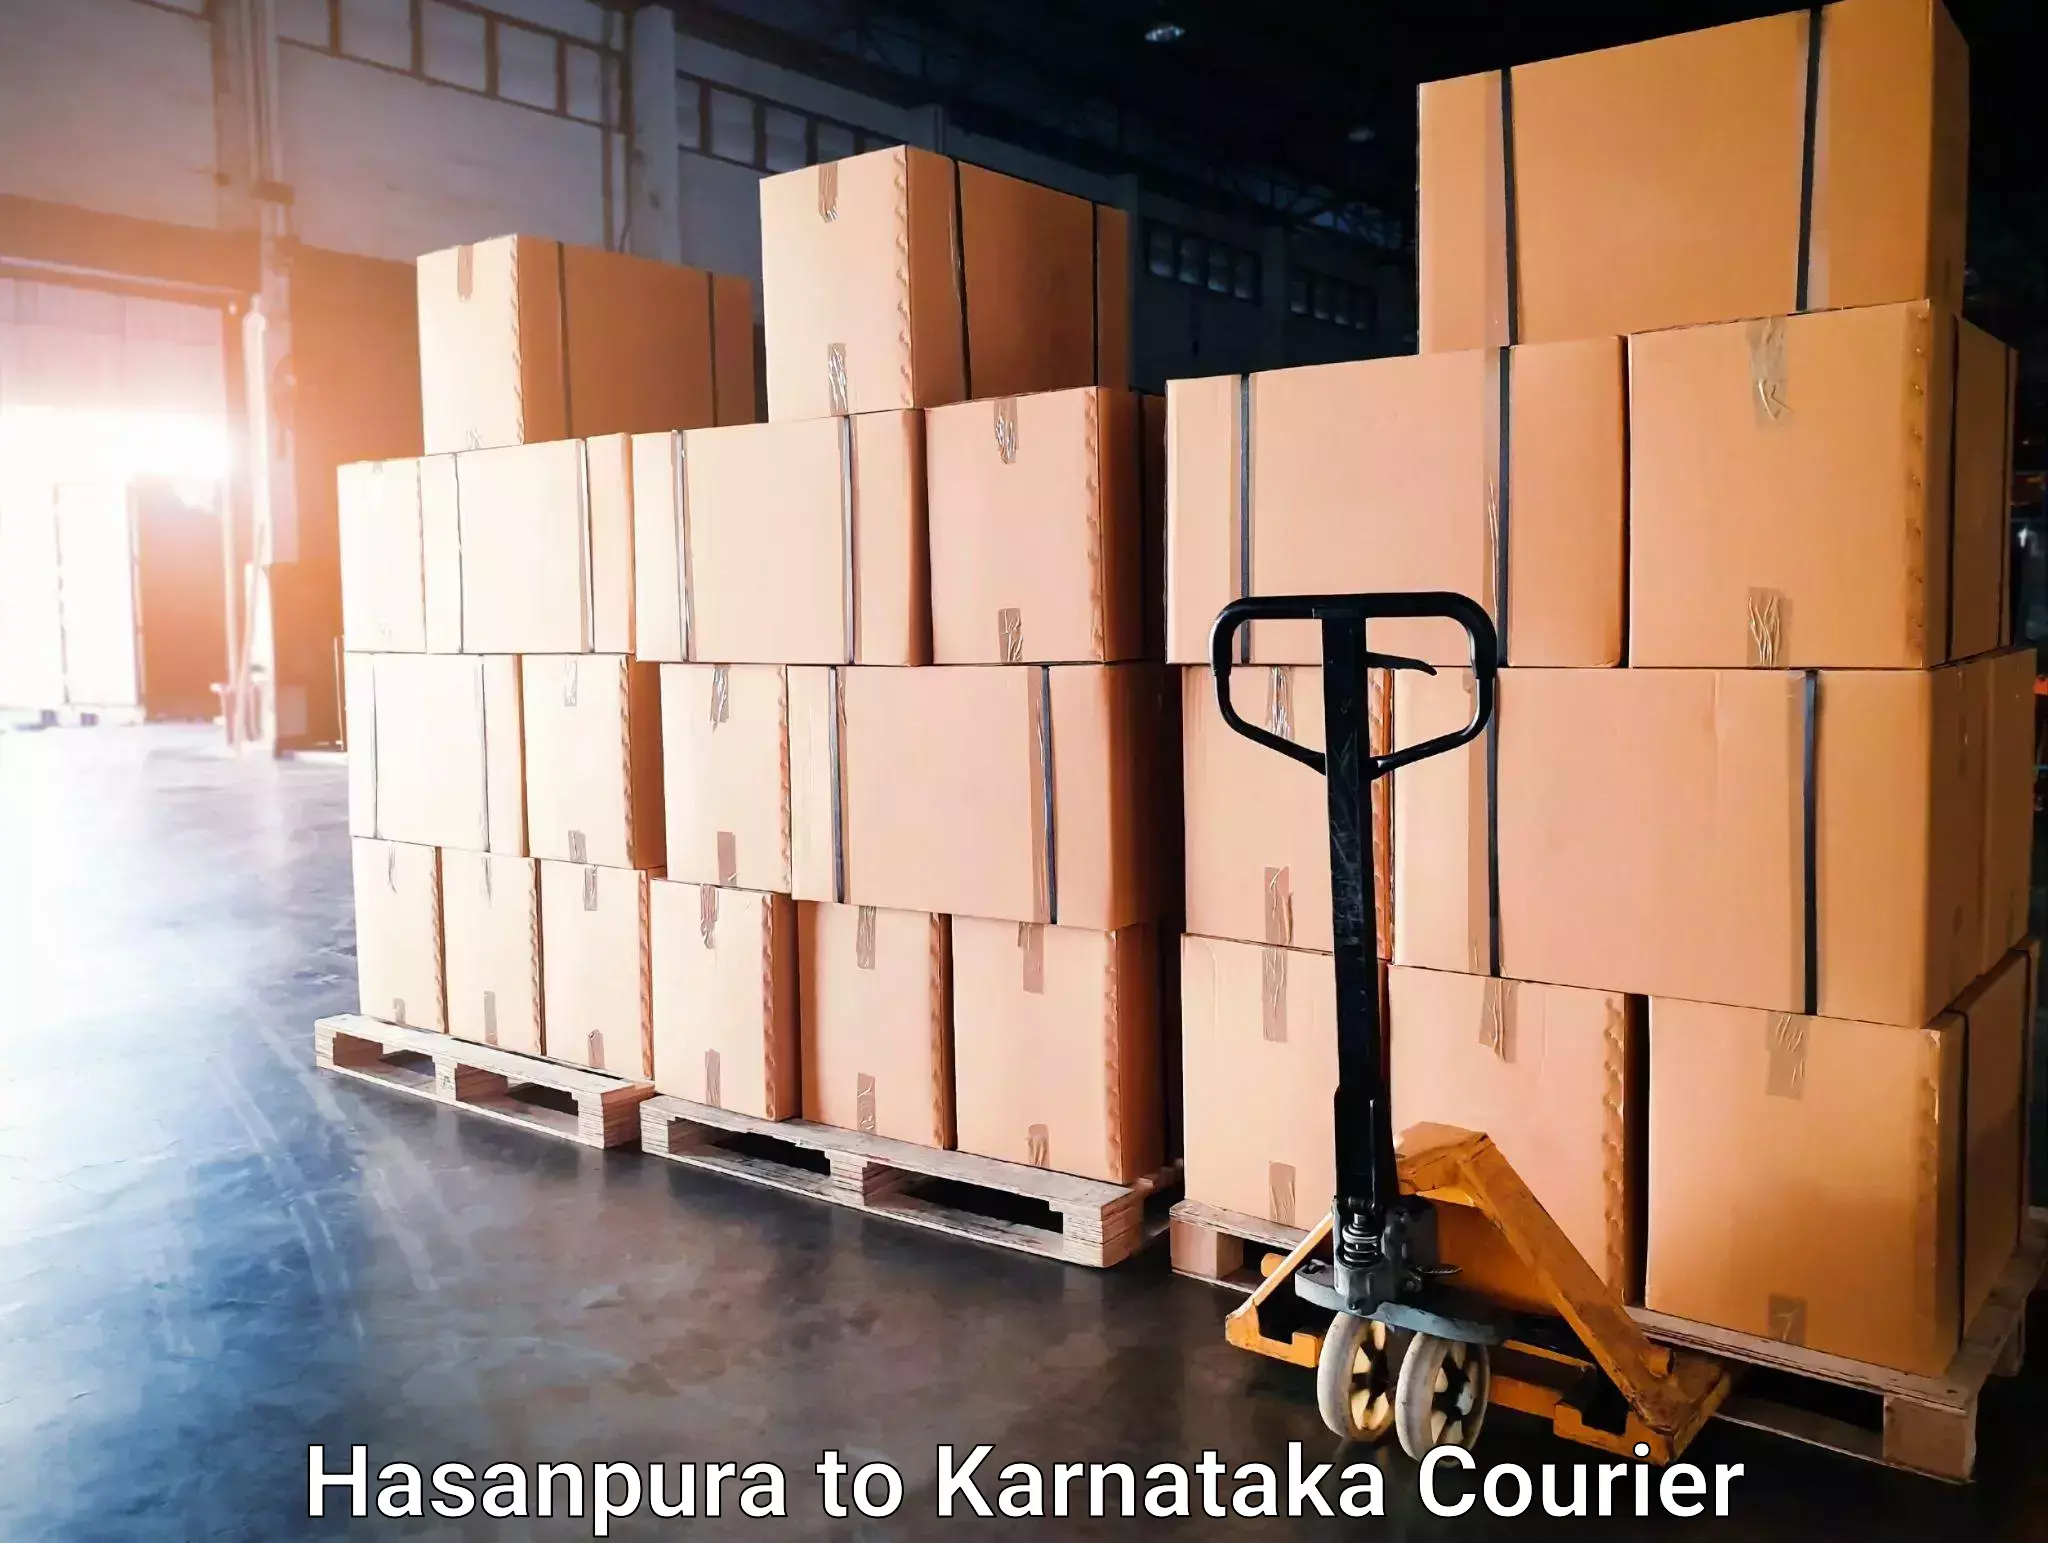 Trusted relocation experts Hasanpura to Shorapur